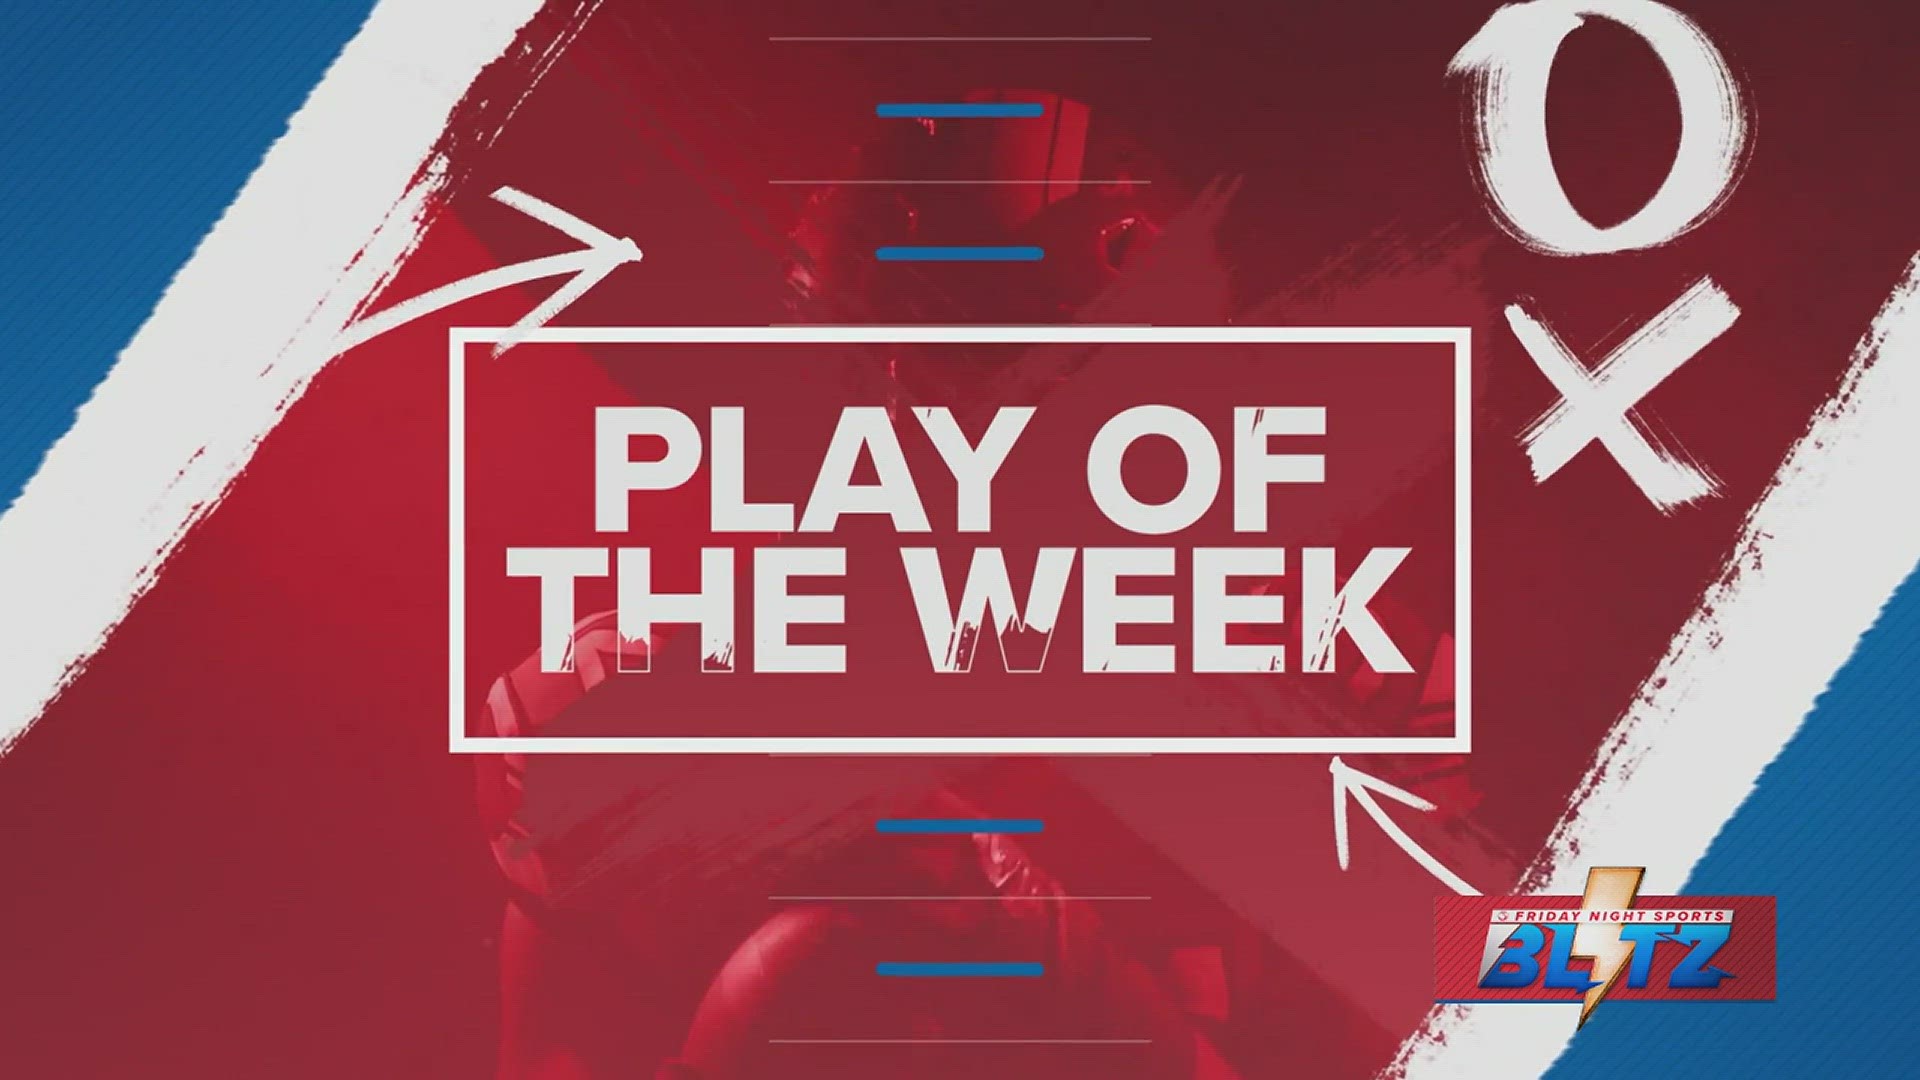 Miller's Vela wins "Play of the Week" honors and we look at Saturday's games.